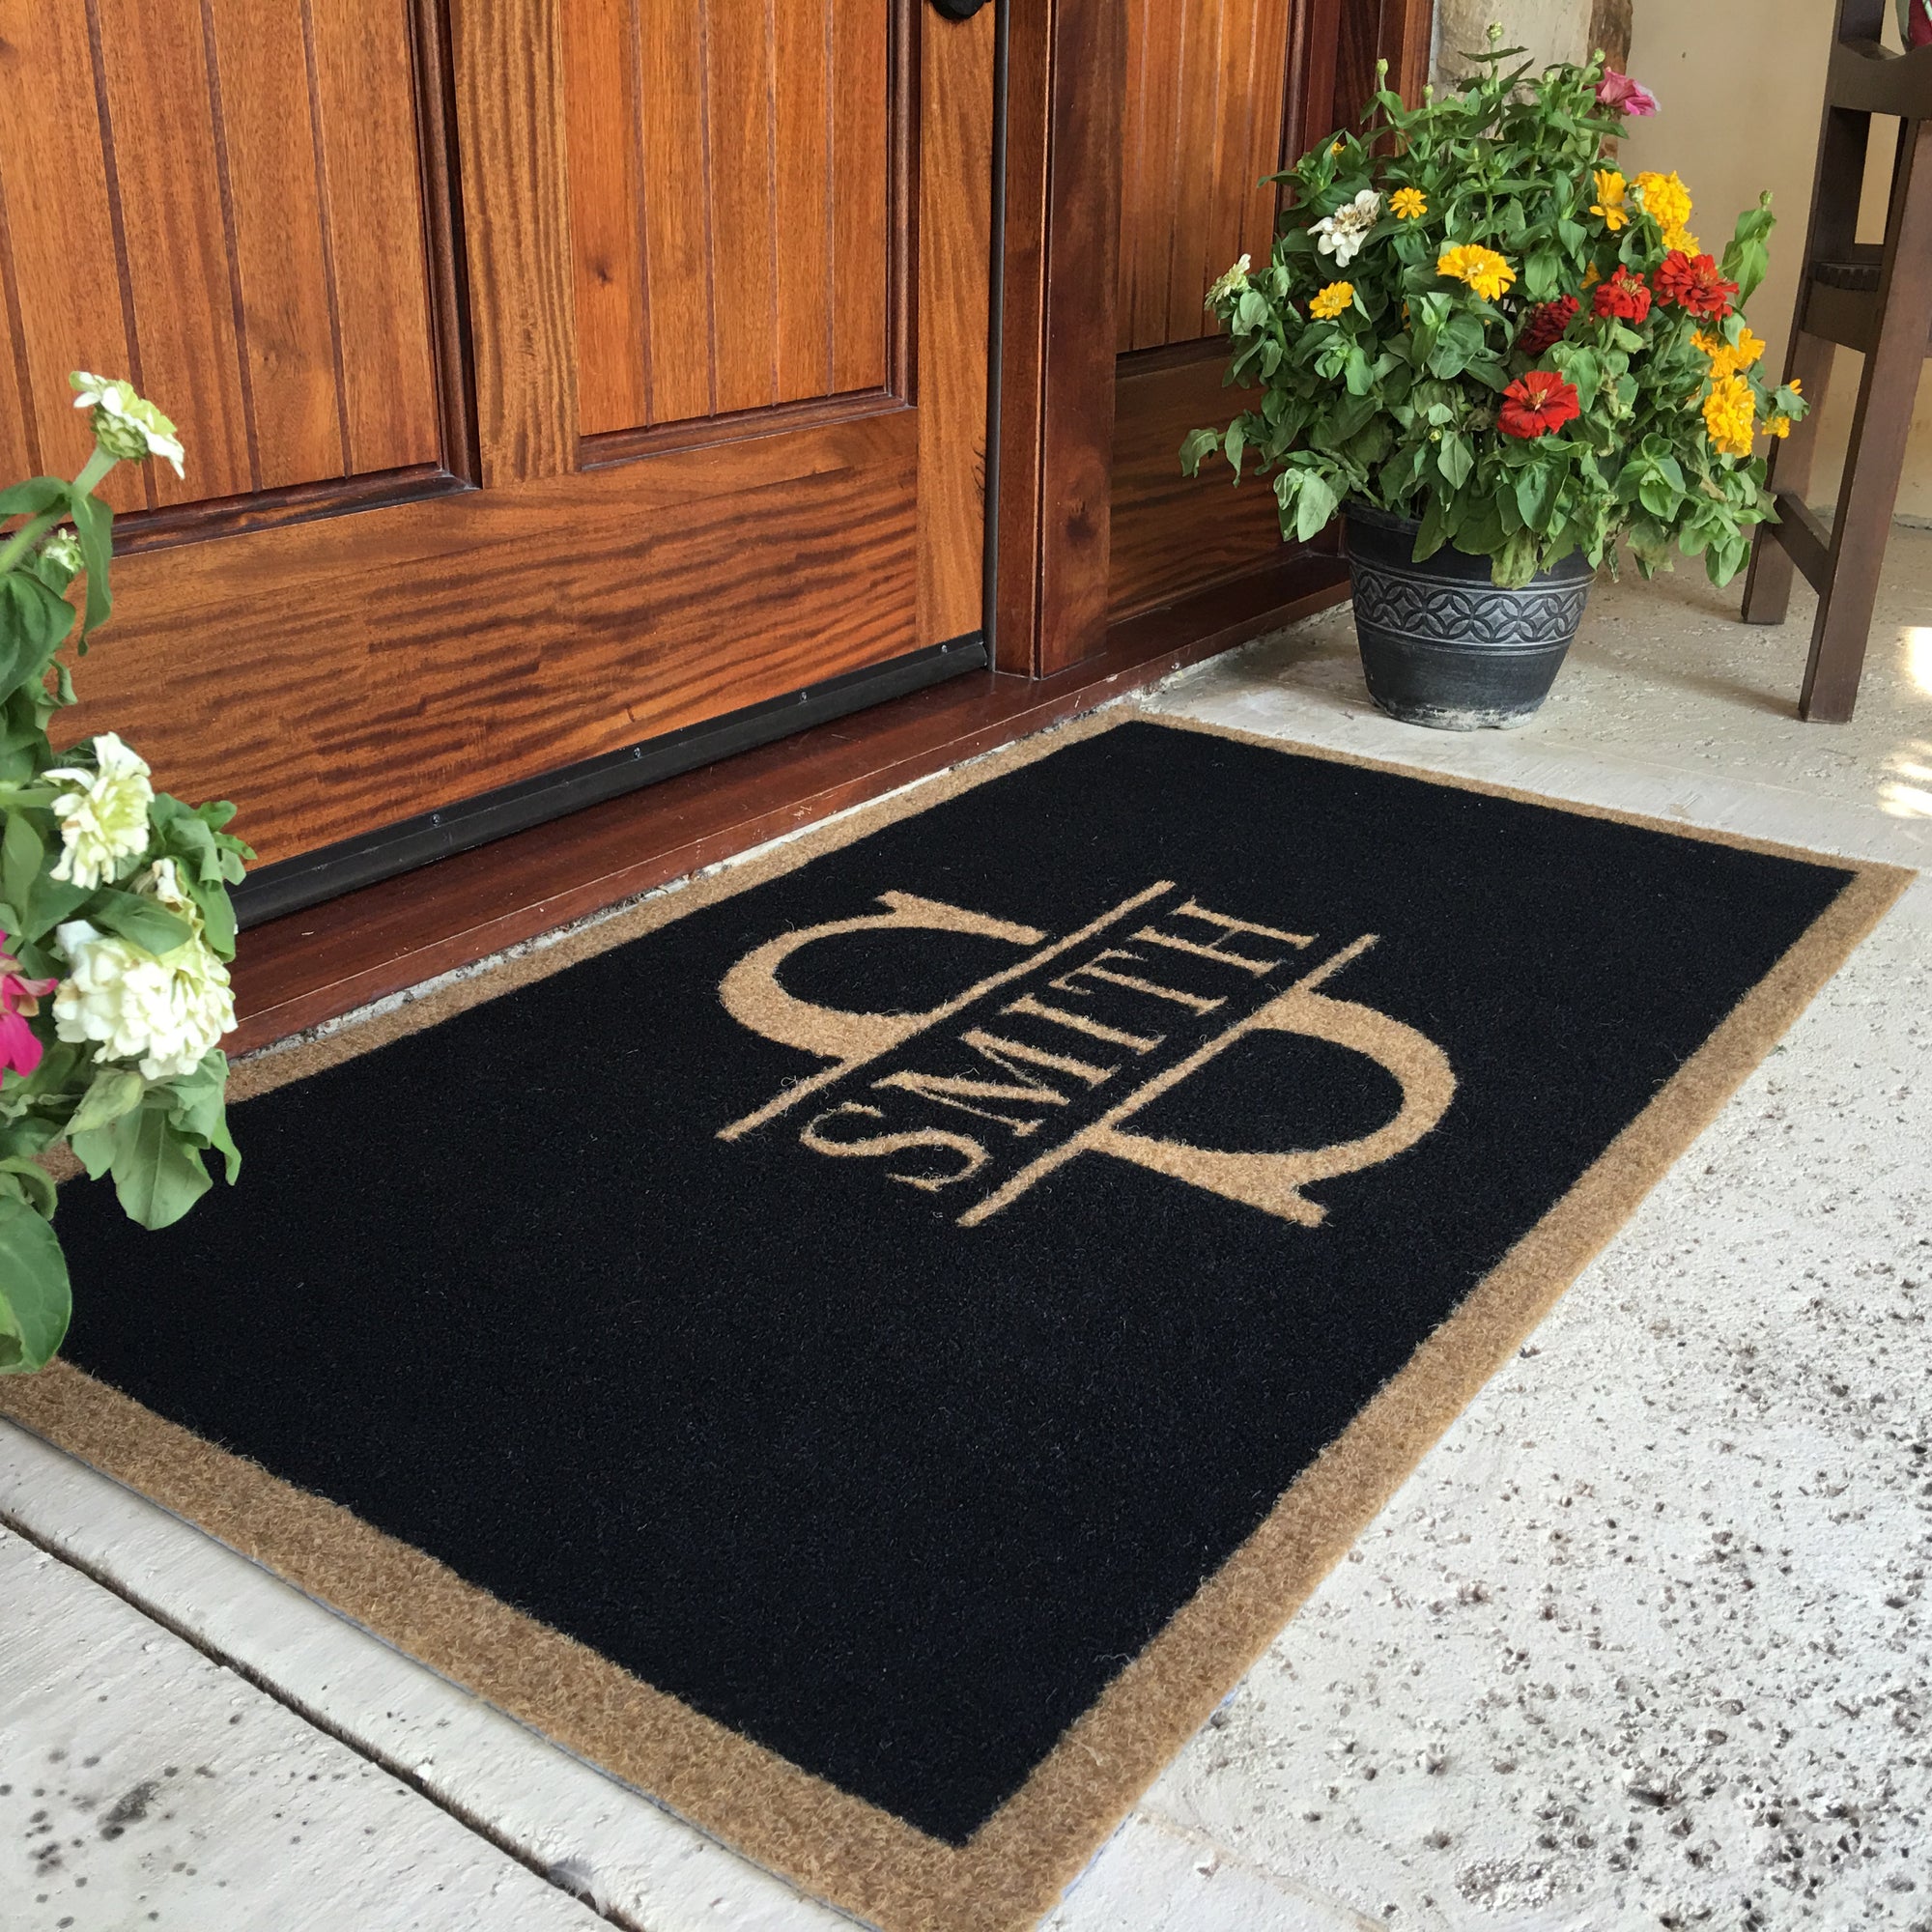 Infinity Custom Mats™ All-Weather Personalized Door Mat - STYLE: WILLIAMS COLOR:BLACK - rugsthatfit.com